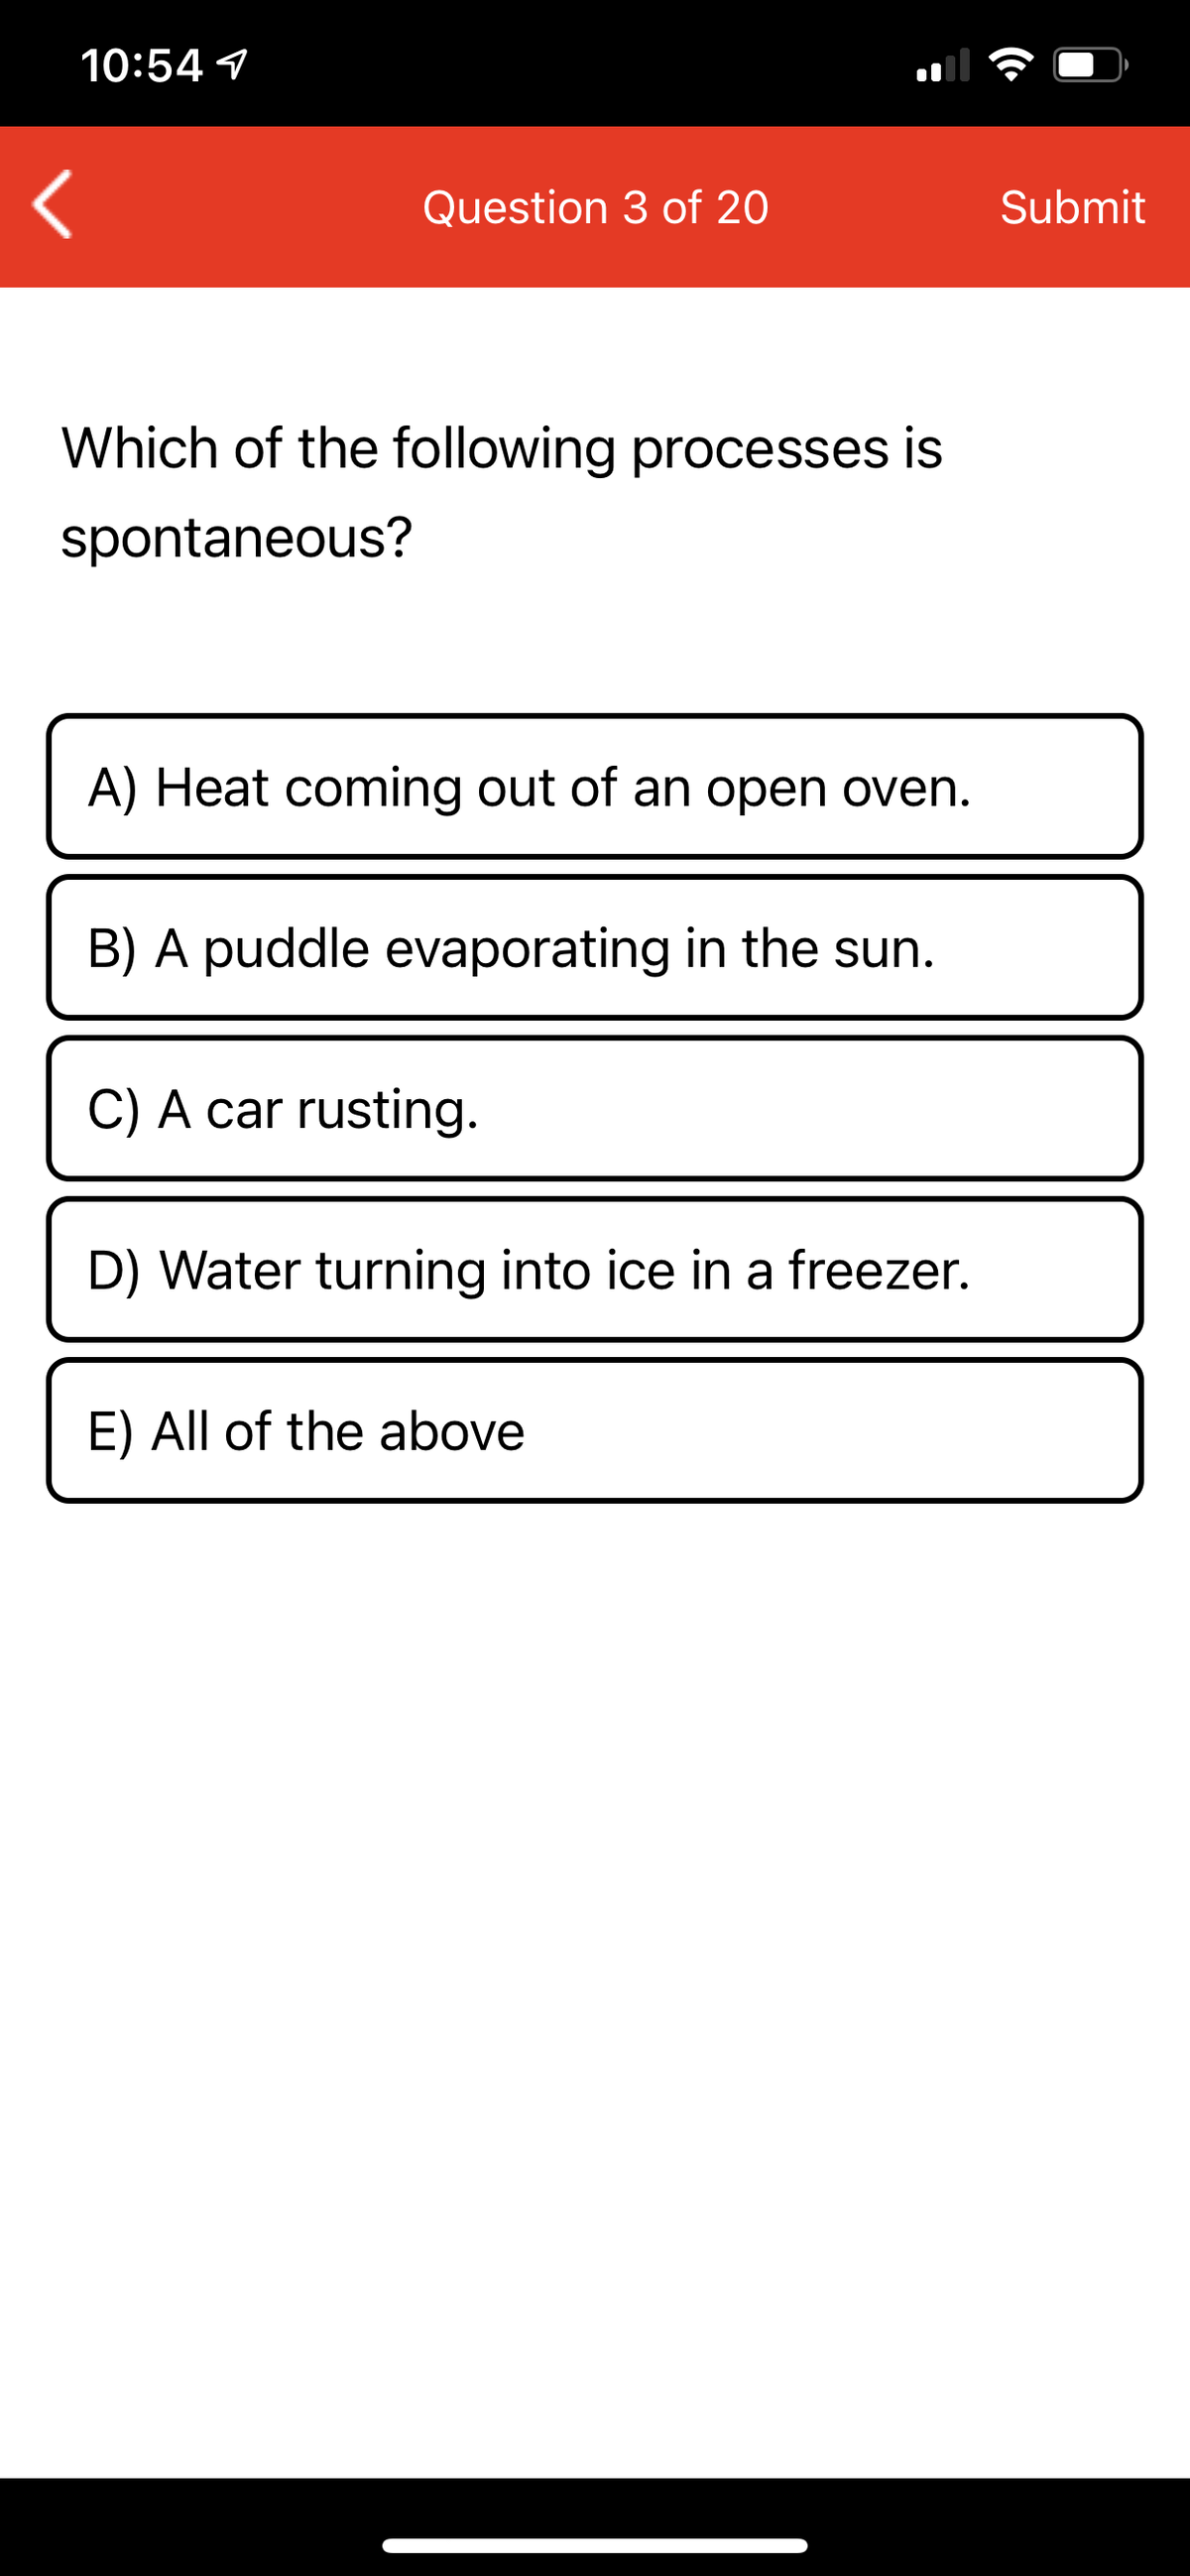 10:54 1
Question 3 of 20
Submit
Which of the following processes is
spontaneous?
A) Heat coming out of an open oven.
B) A puddle evaporating in the sun.
C) A car rusting.
D) Water turning into ice in a freezer.
E) All of the above
